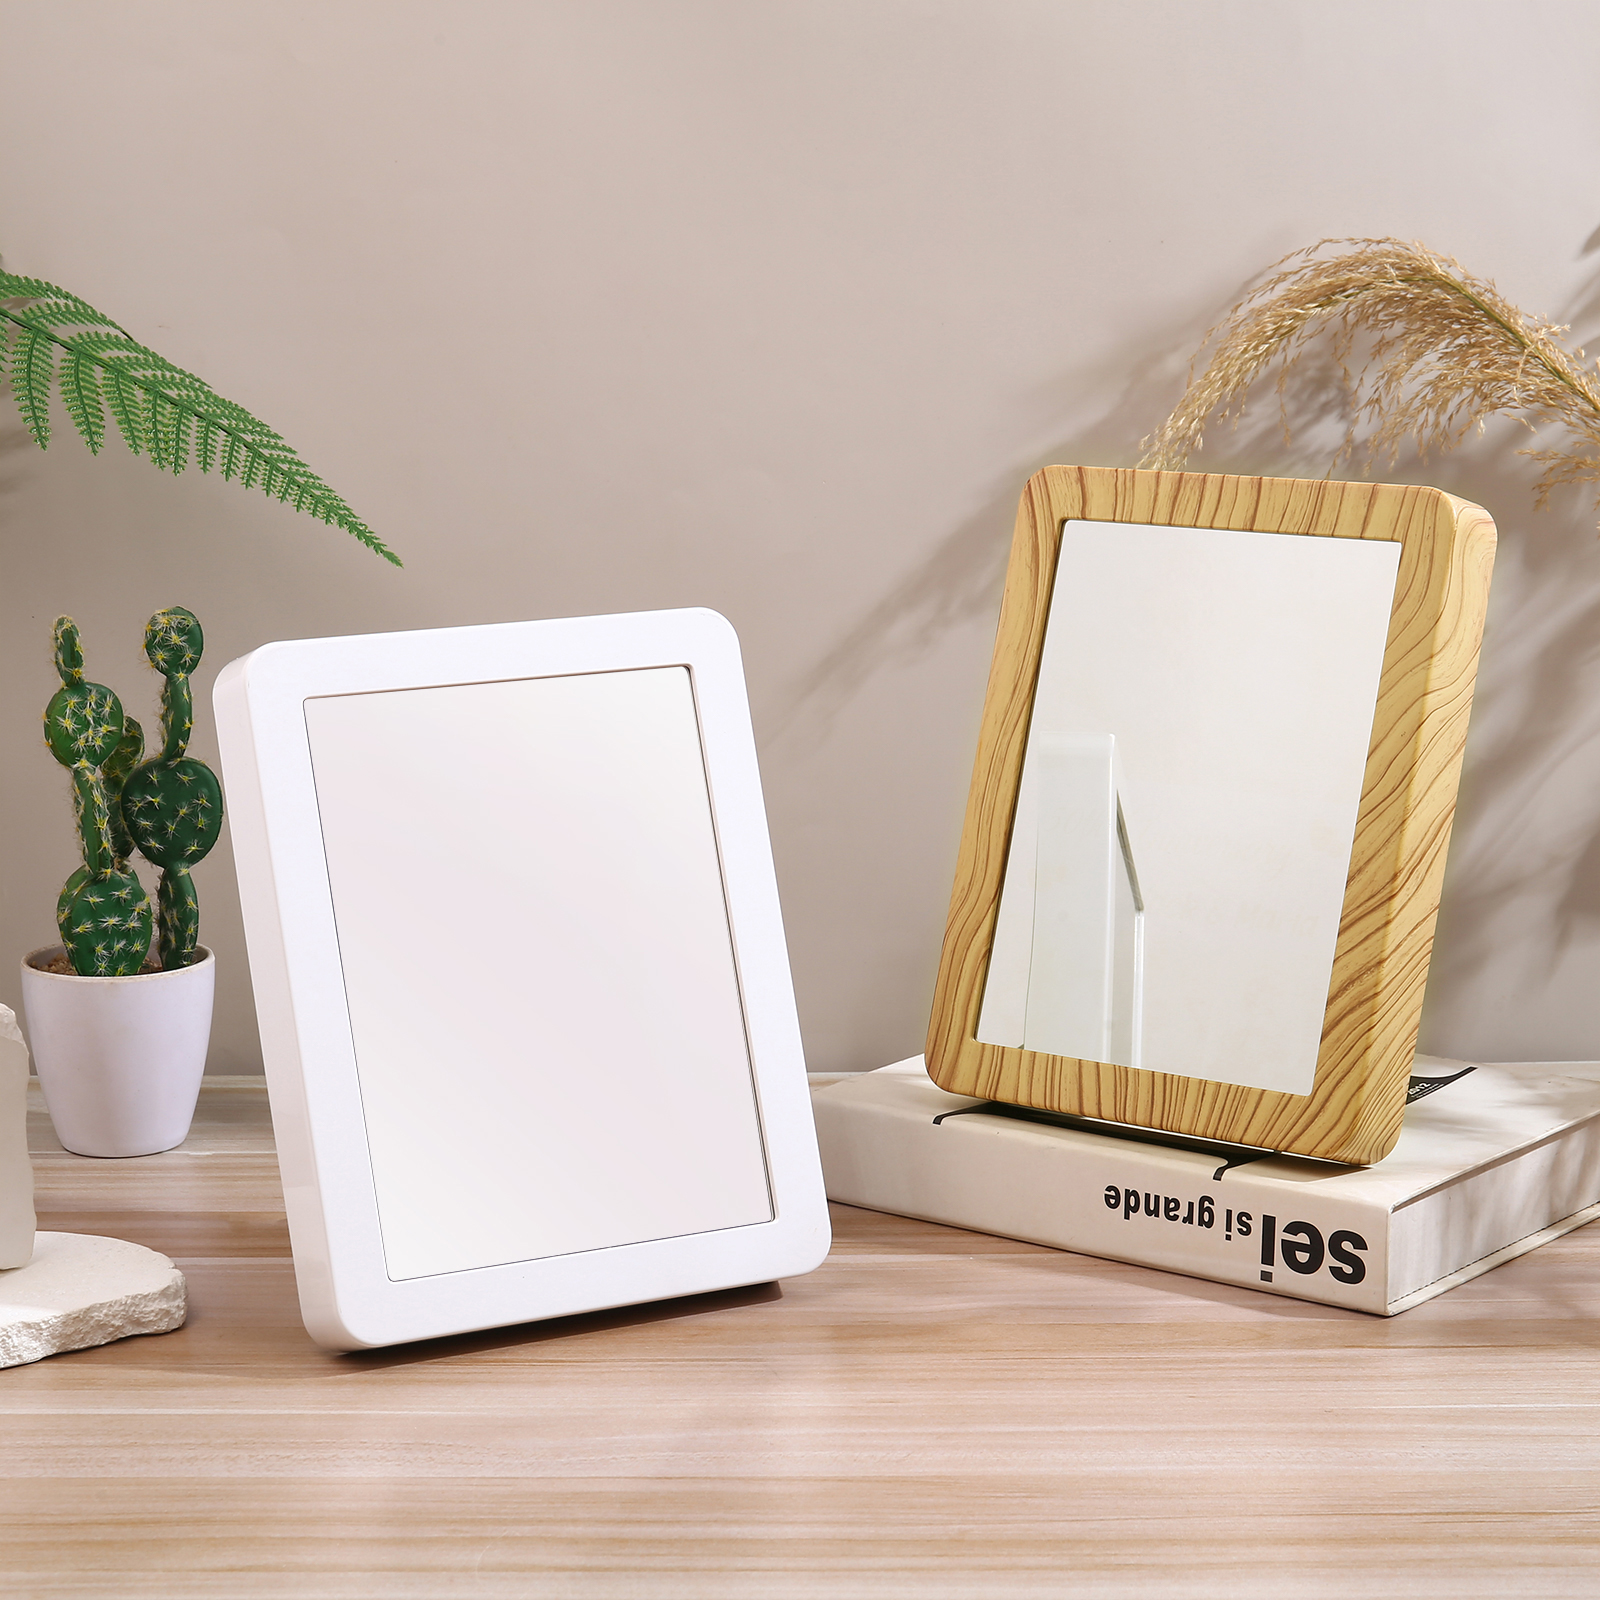 2 Names - Personalized Home Mirror Photo Frame Night Light Insert/Rechargeable Custom Text LED Night Light Gift for Mom